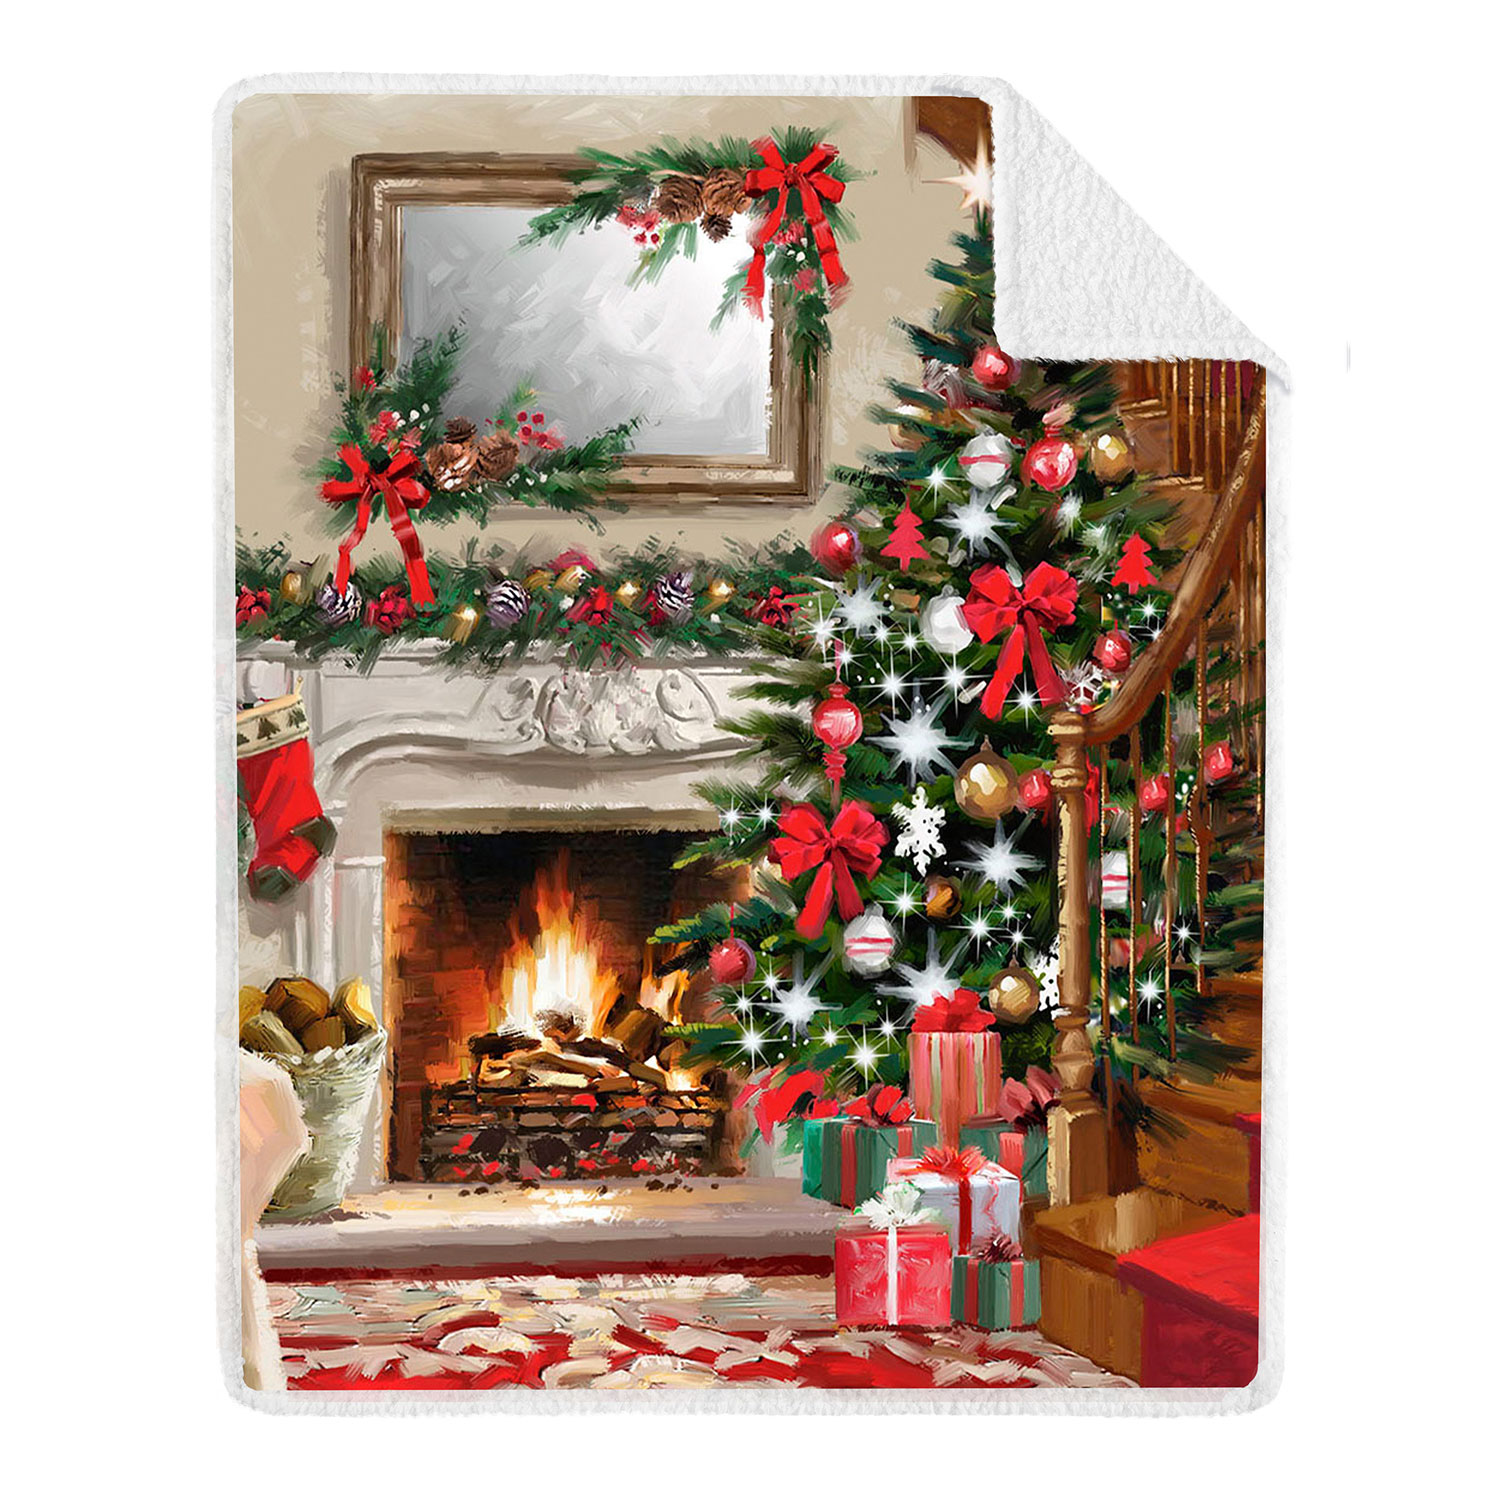 Printed photoreal throw with sherpa backing, 48"x60" - XMas fireplace